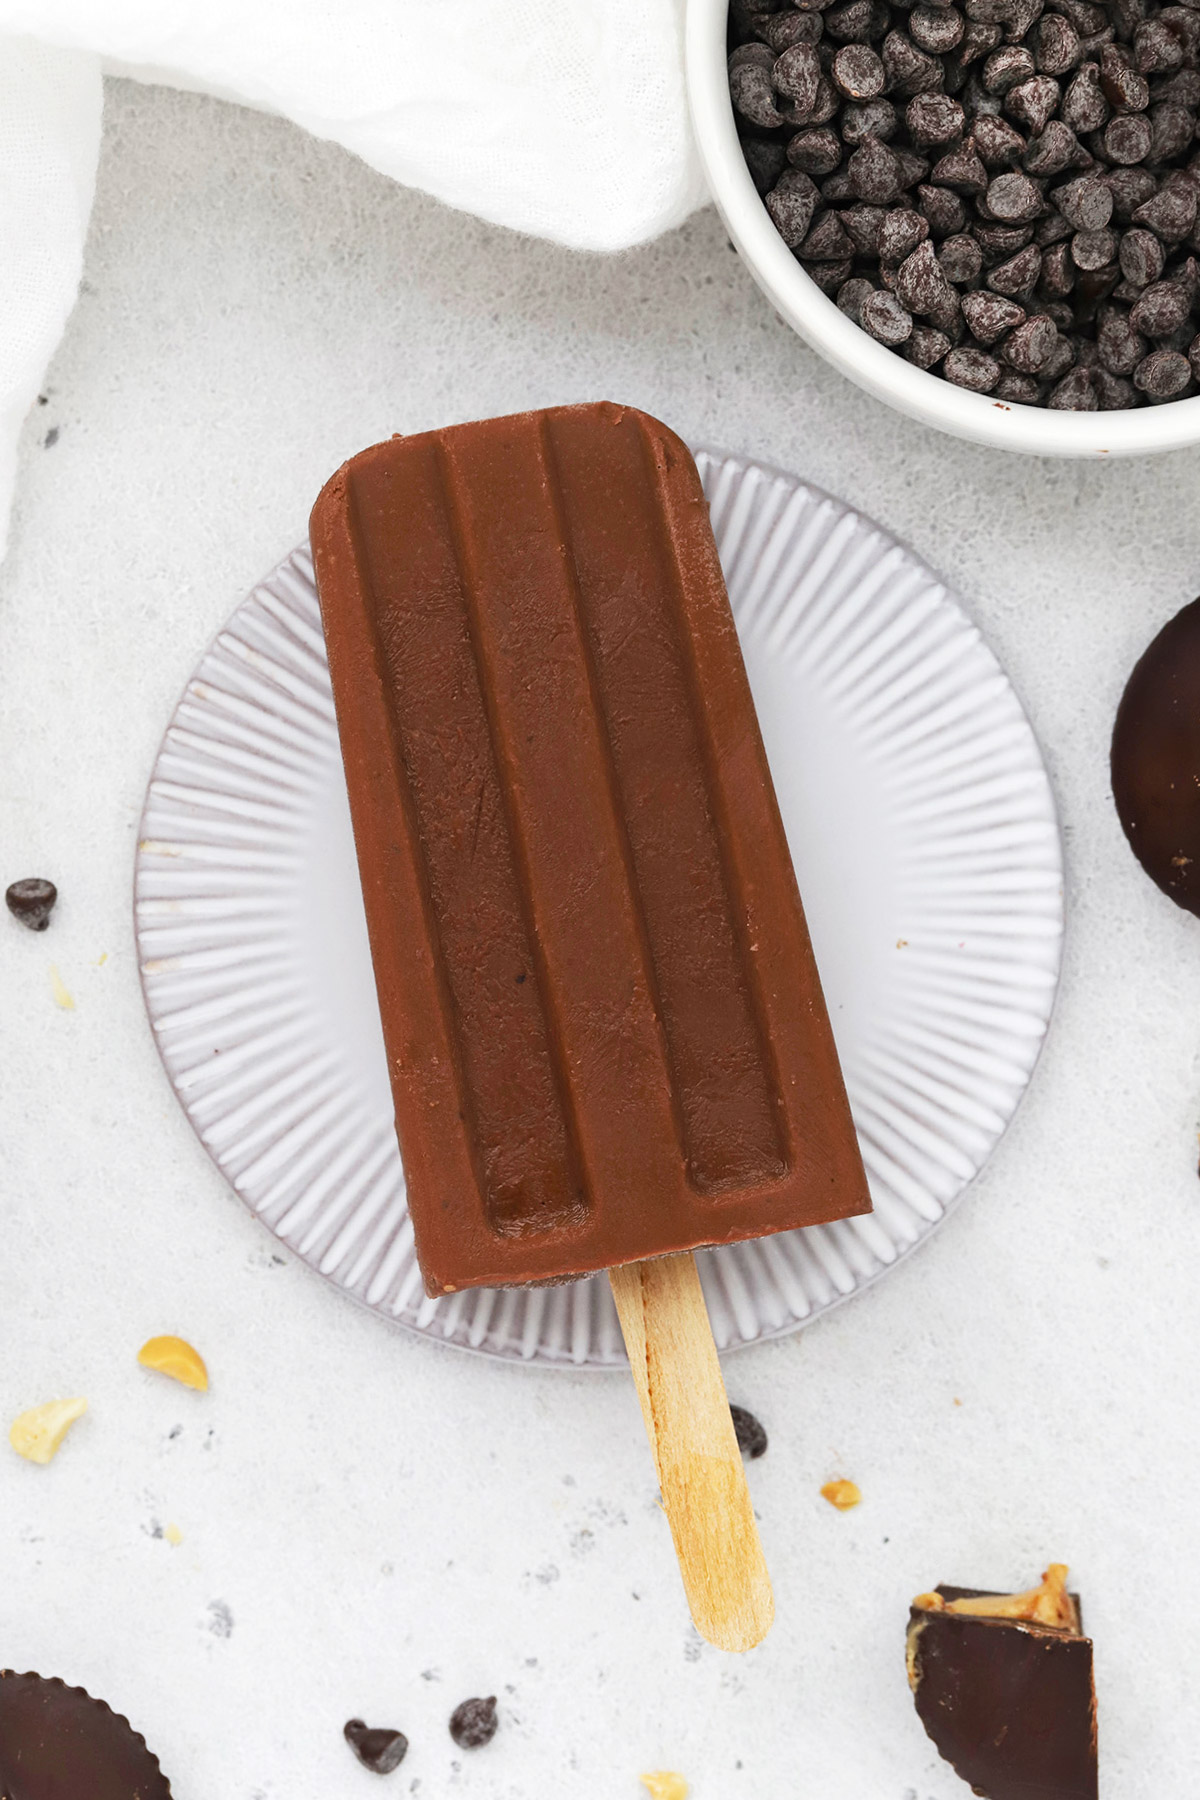 Overhead view of a chocolate peanut butter popsicle on a coaster